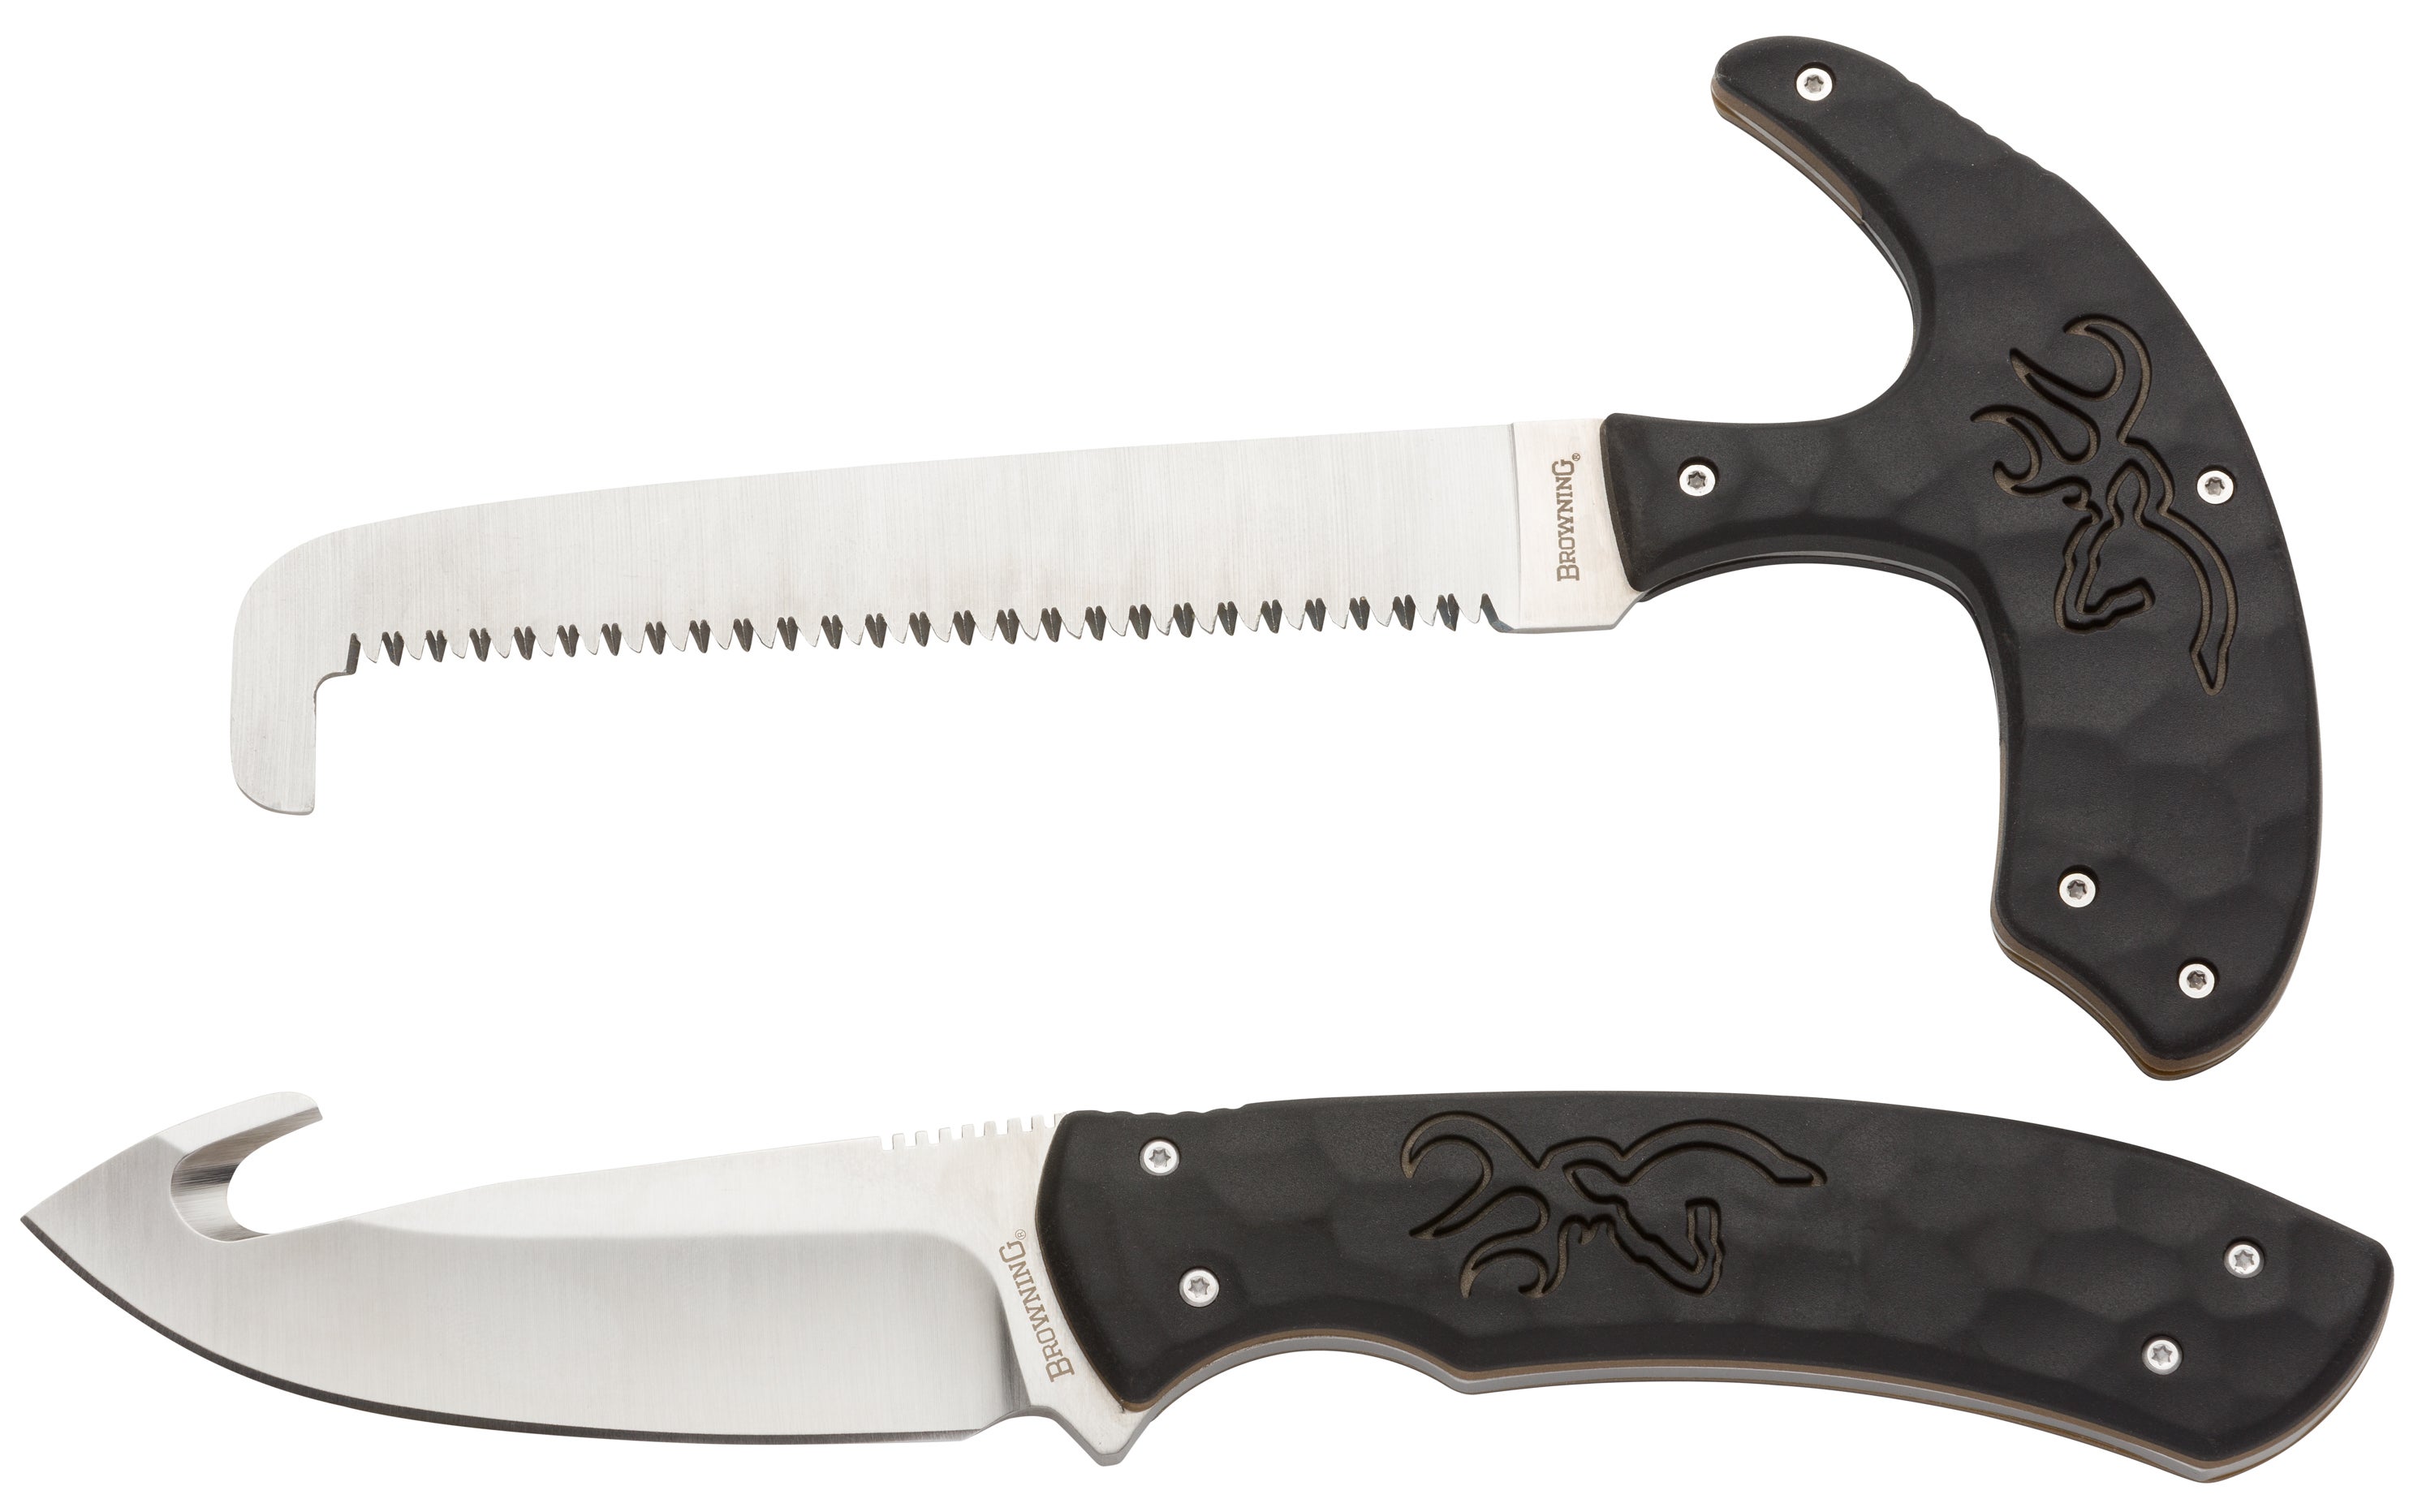 Primal Combo – 2 Piece - Hunting Knives - Browning